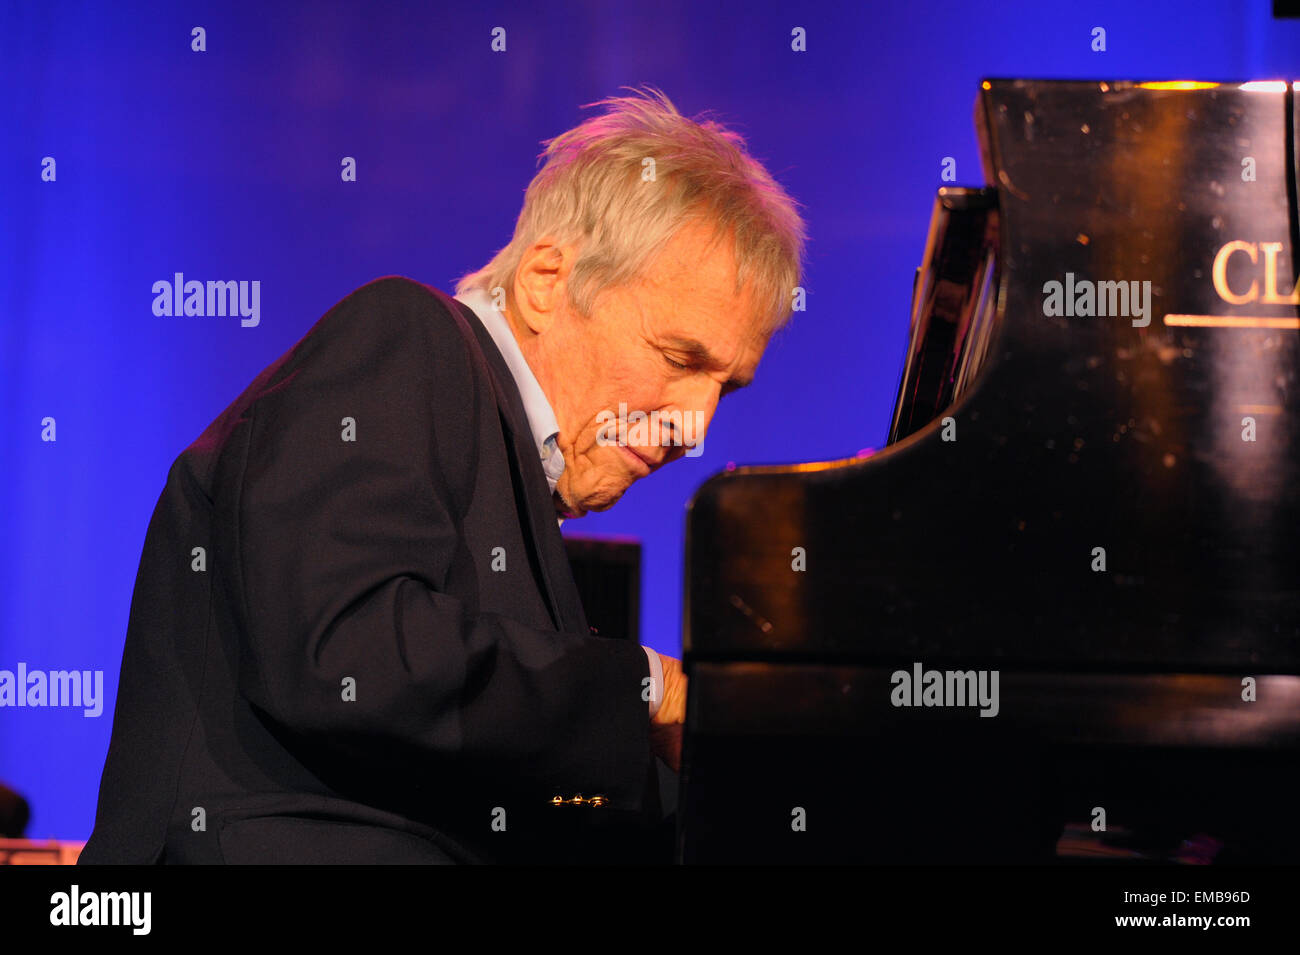 Composer, songwriter, singer and pianist Burt Bacharach in concert at the piano. Stock Photo